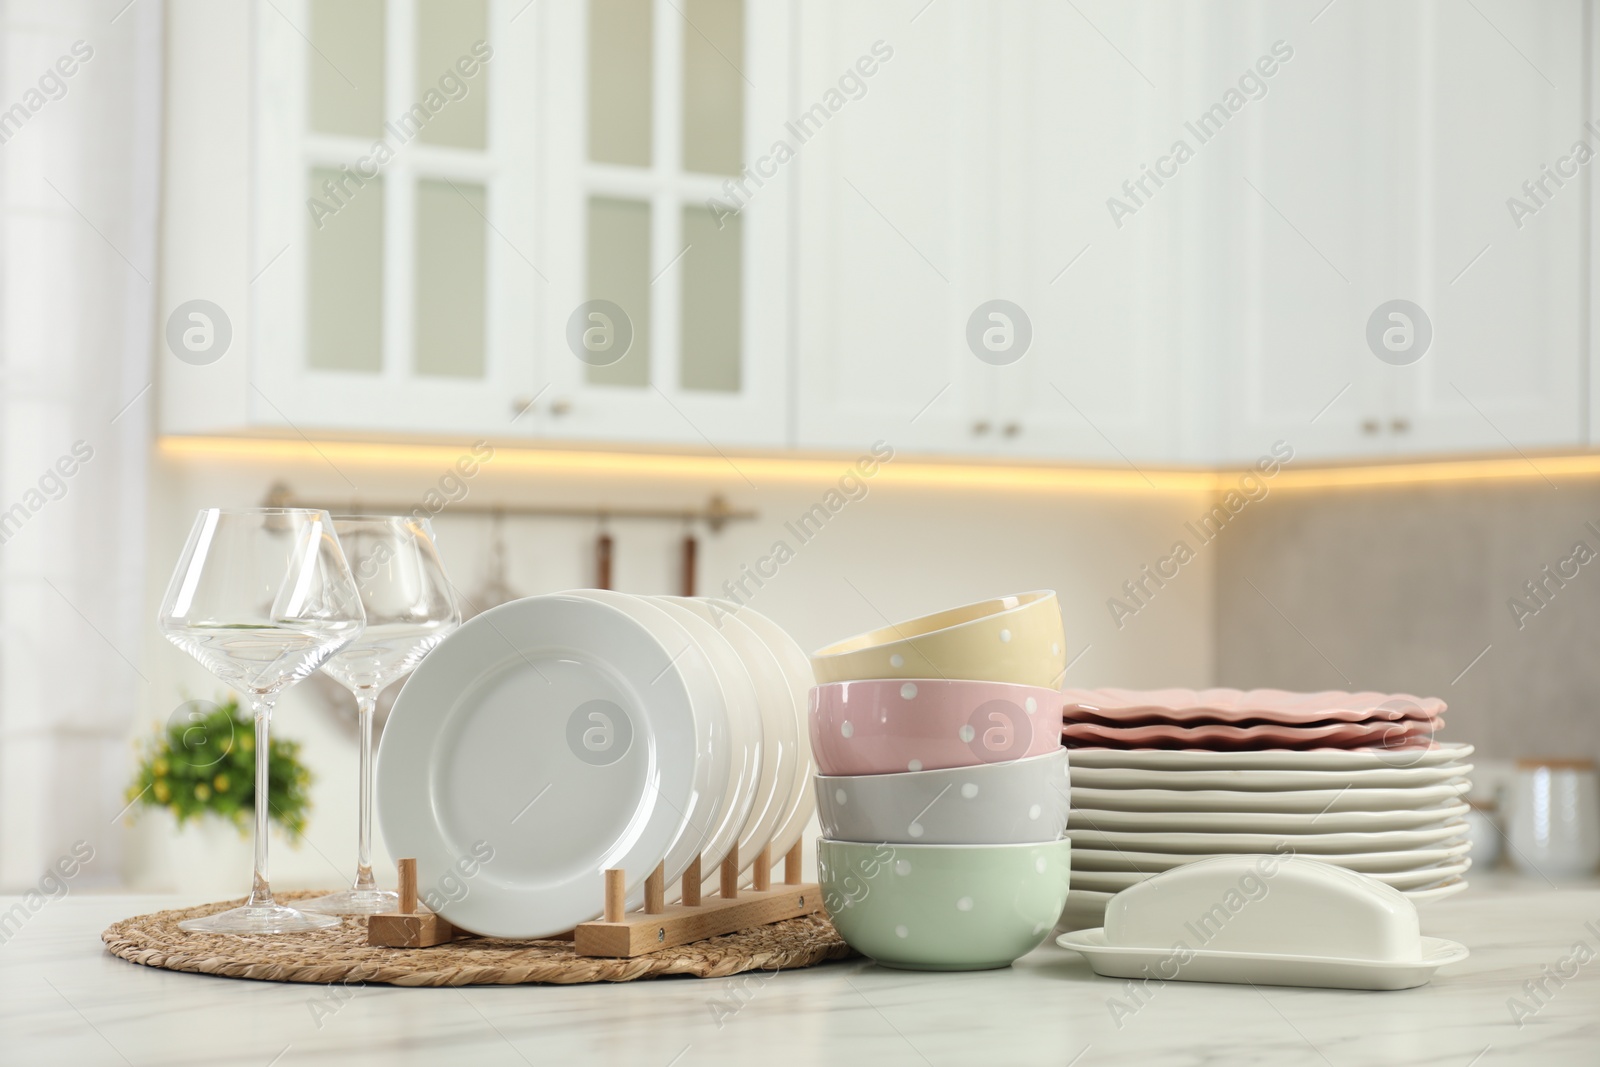 Photo of Clean plates, bowls, butter dish and glasses on white marble table in kitchen